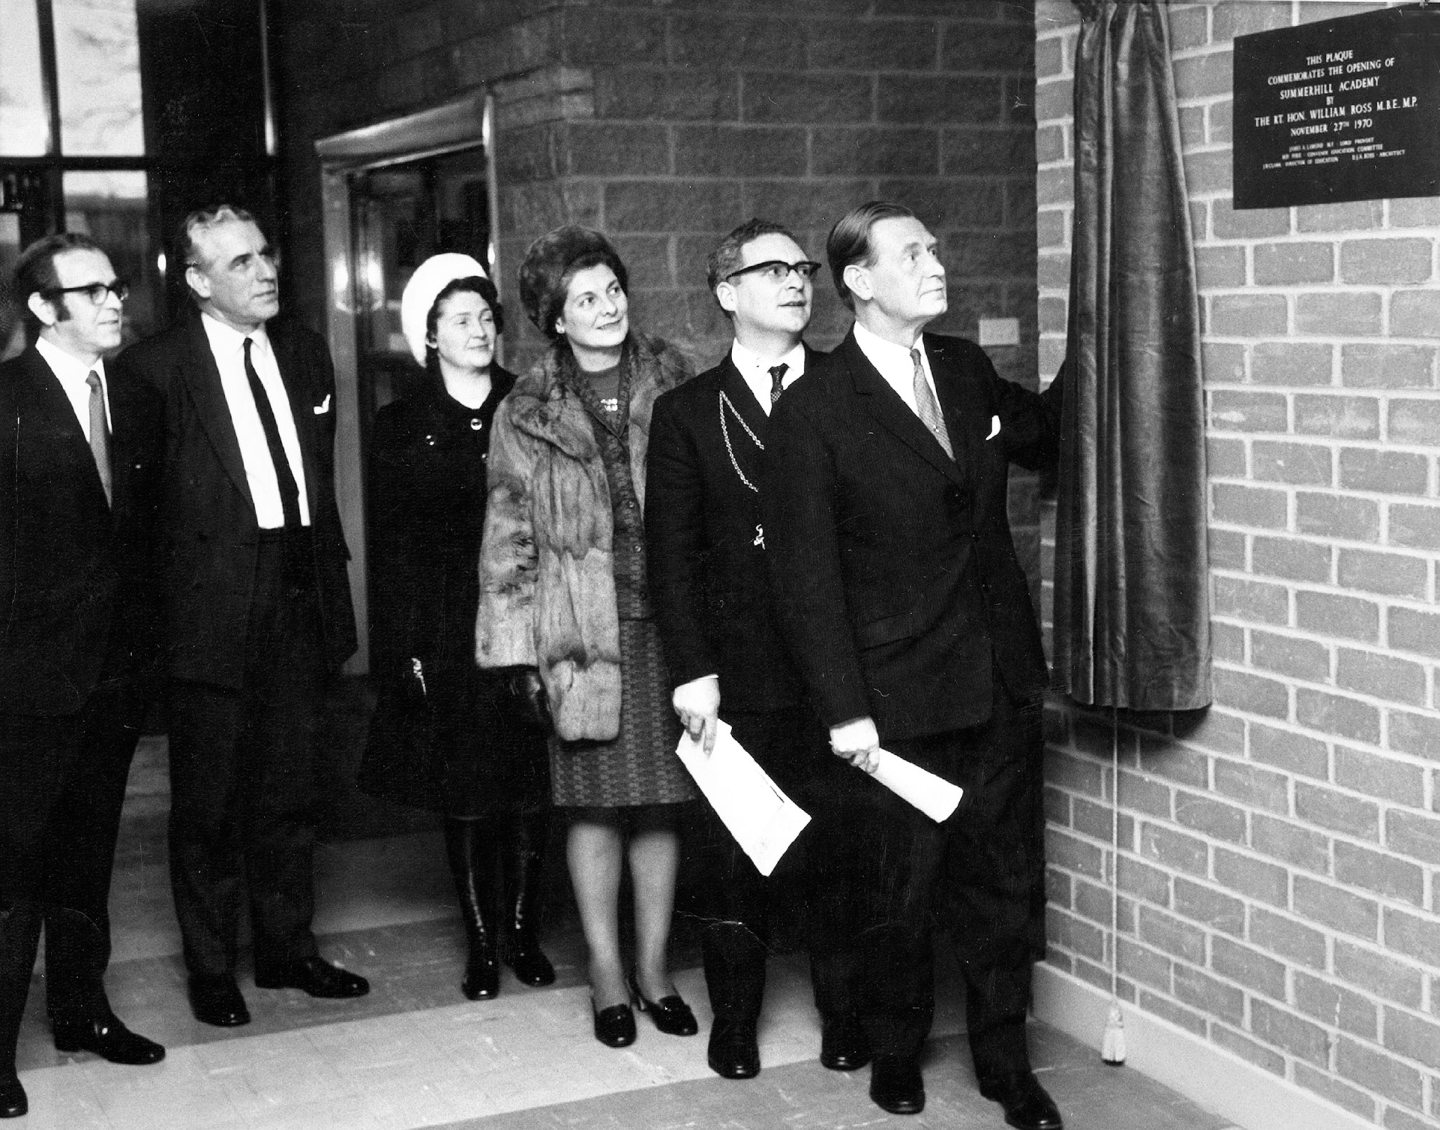 Former Scottish Secretary Willie Ross unveils a plaque in 1970 commemorating the school's 'second opening' in 1970.